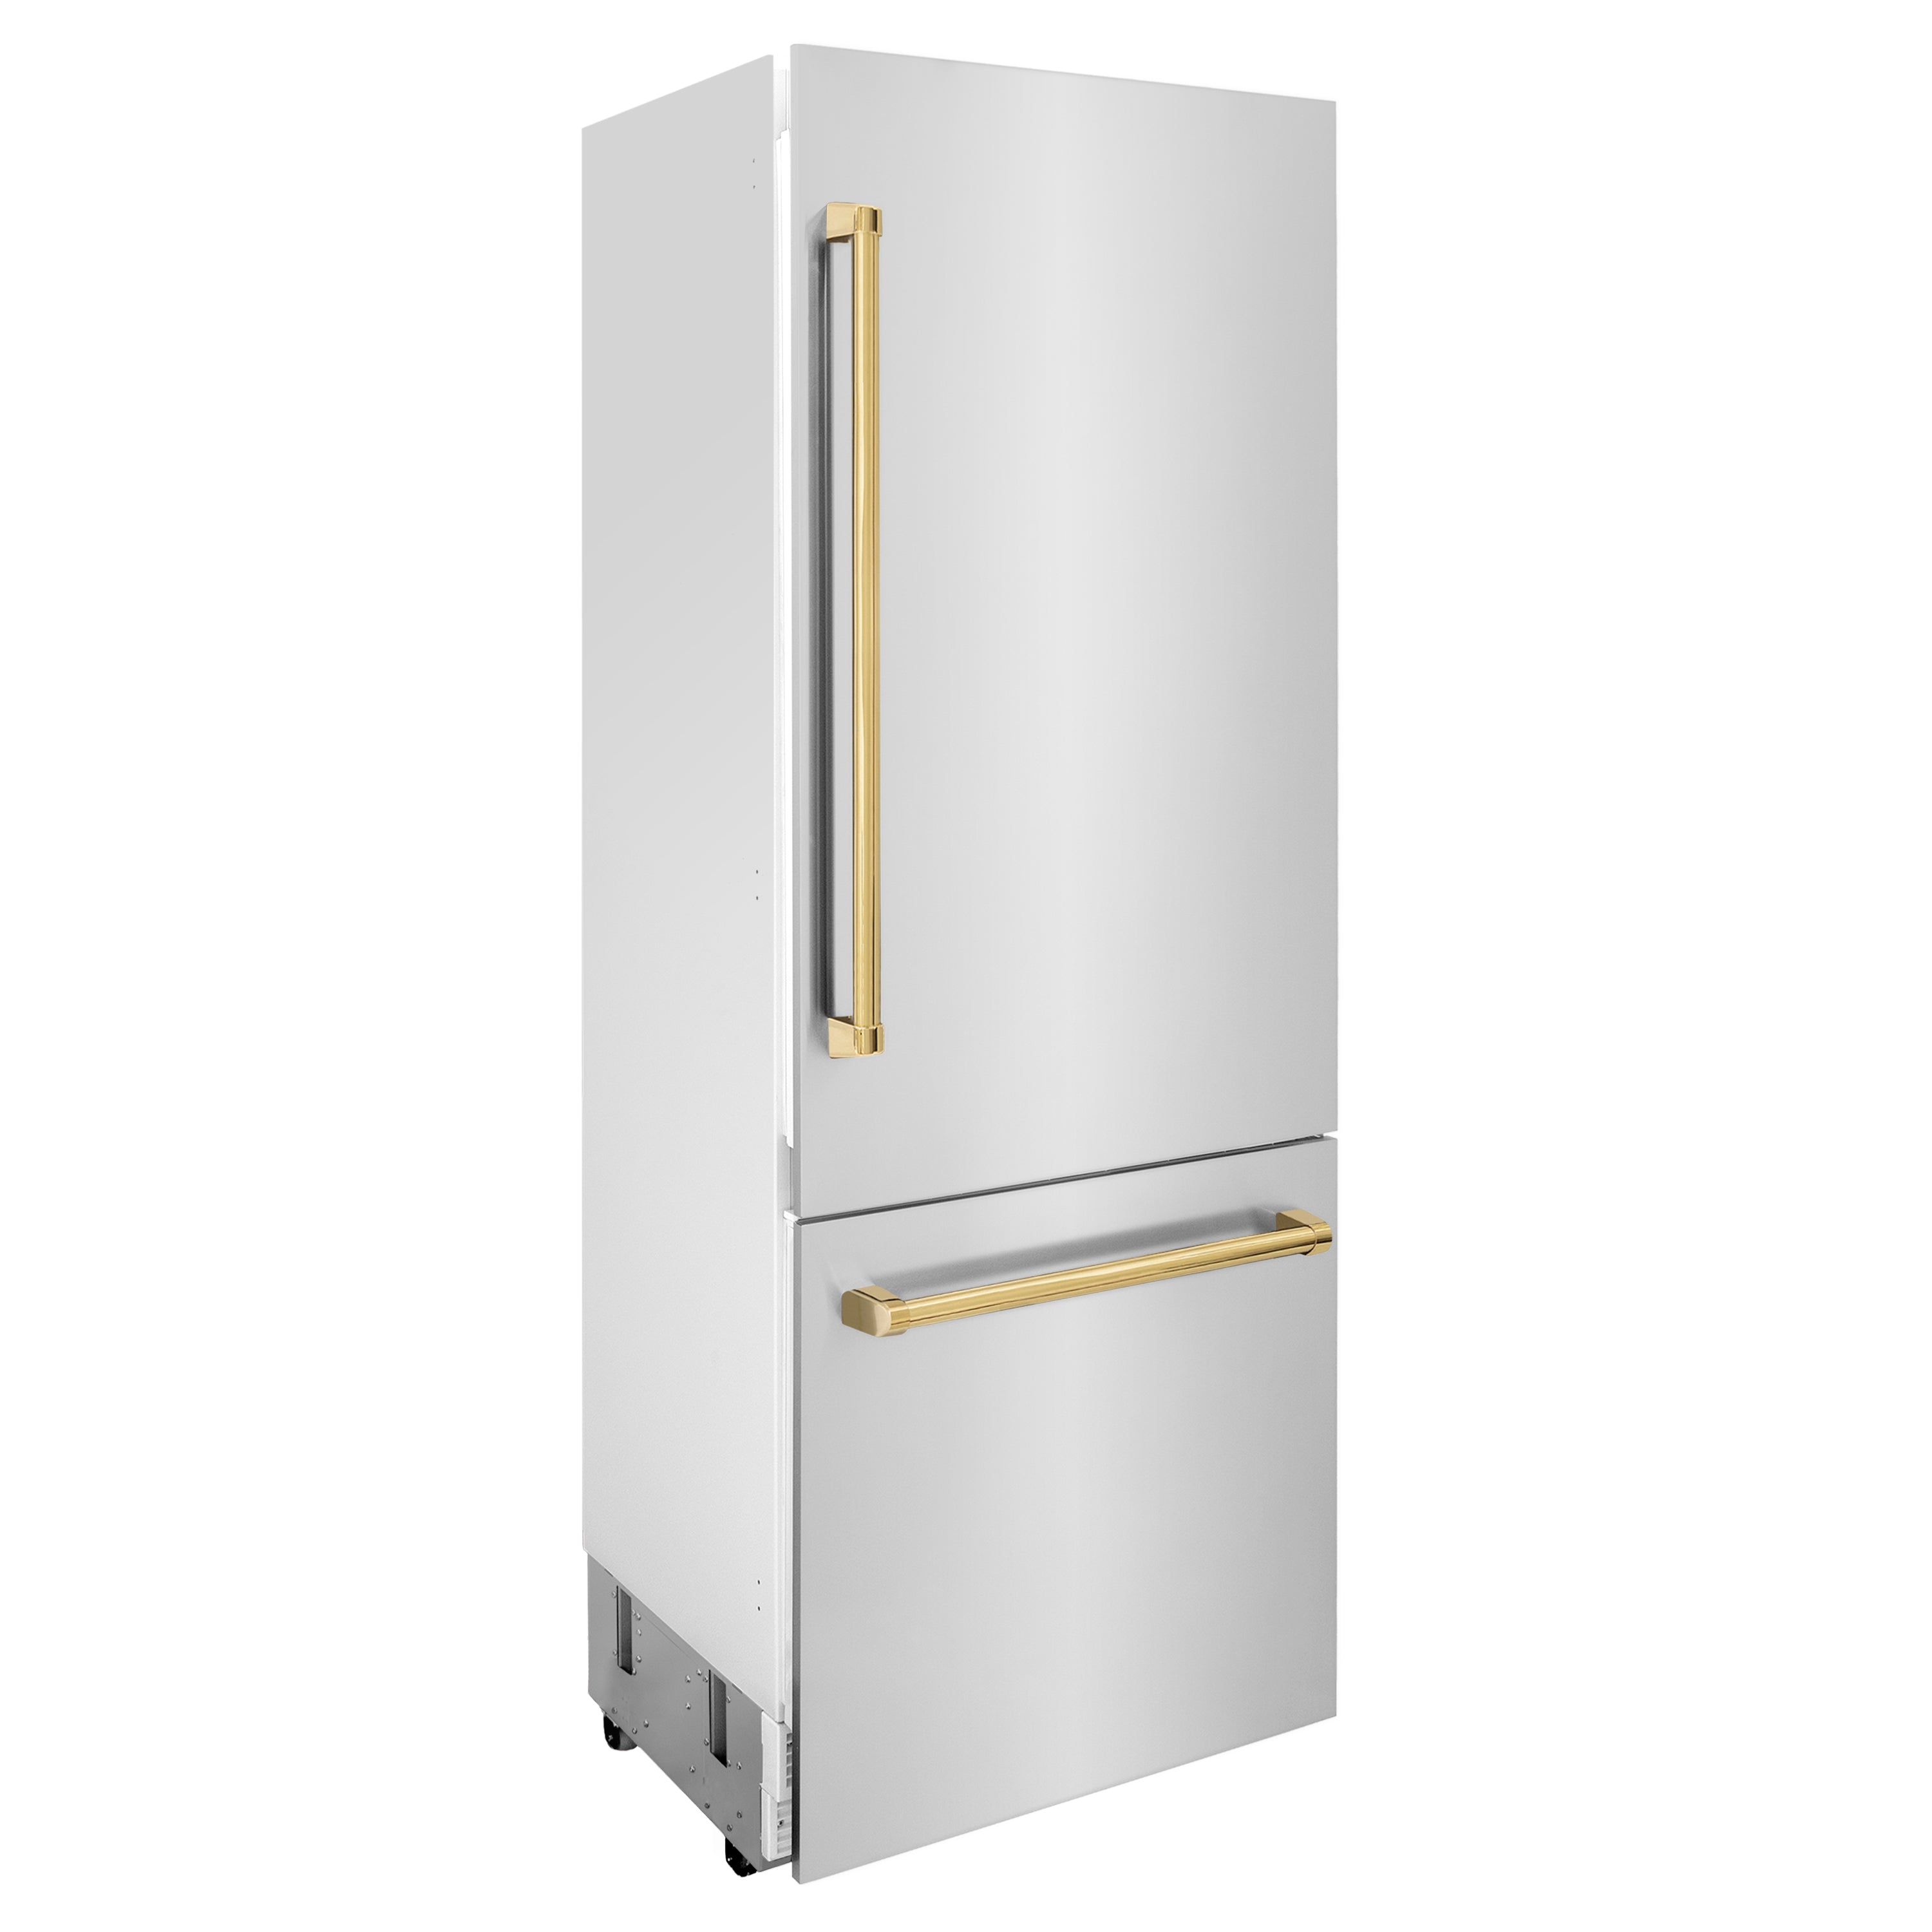 ZLINE 30ð Autograph Edition 16.1 cu. ft. Built-in 2-Door Bottom Freezer Refrigerator with Internal Water and Ice Dispenser in Stainless Steel with Polished Gold Accents